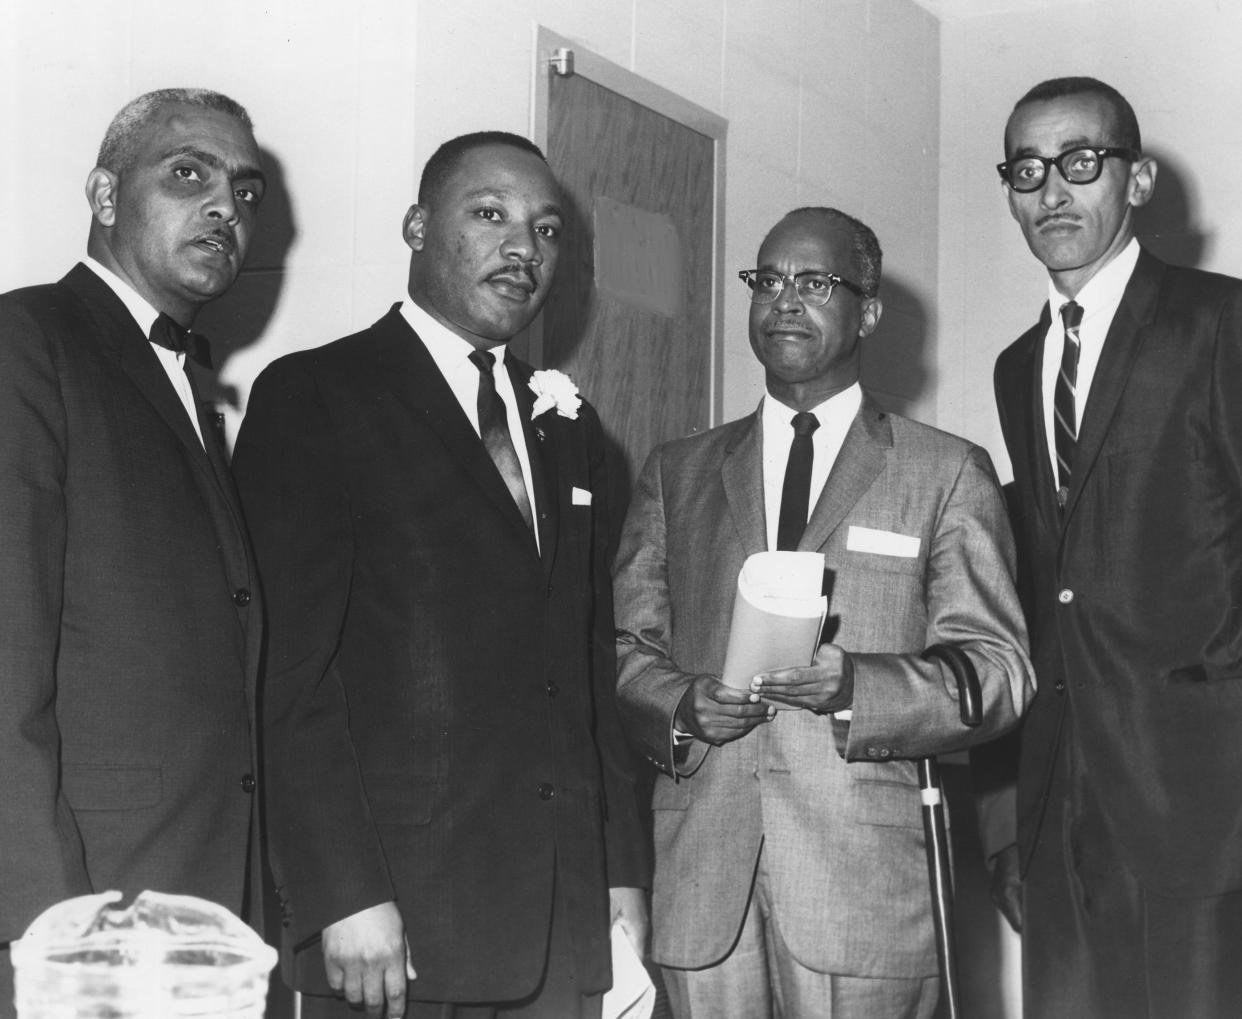 Rev. Martin Luther King, Jr. poses with Rev. Charles Rolette, Rev. Bernard White and another unidentified local minister after speaking at the University of Notre Dame on Oct. 18, 1963.